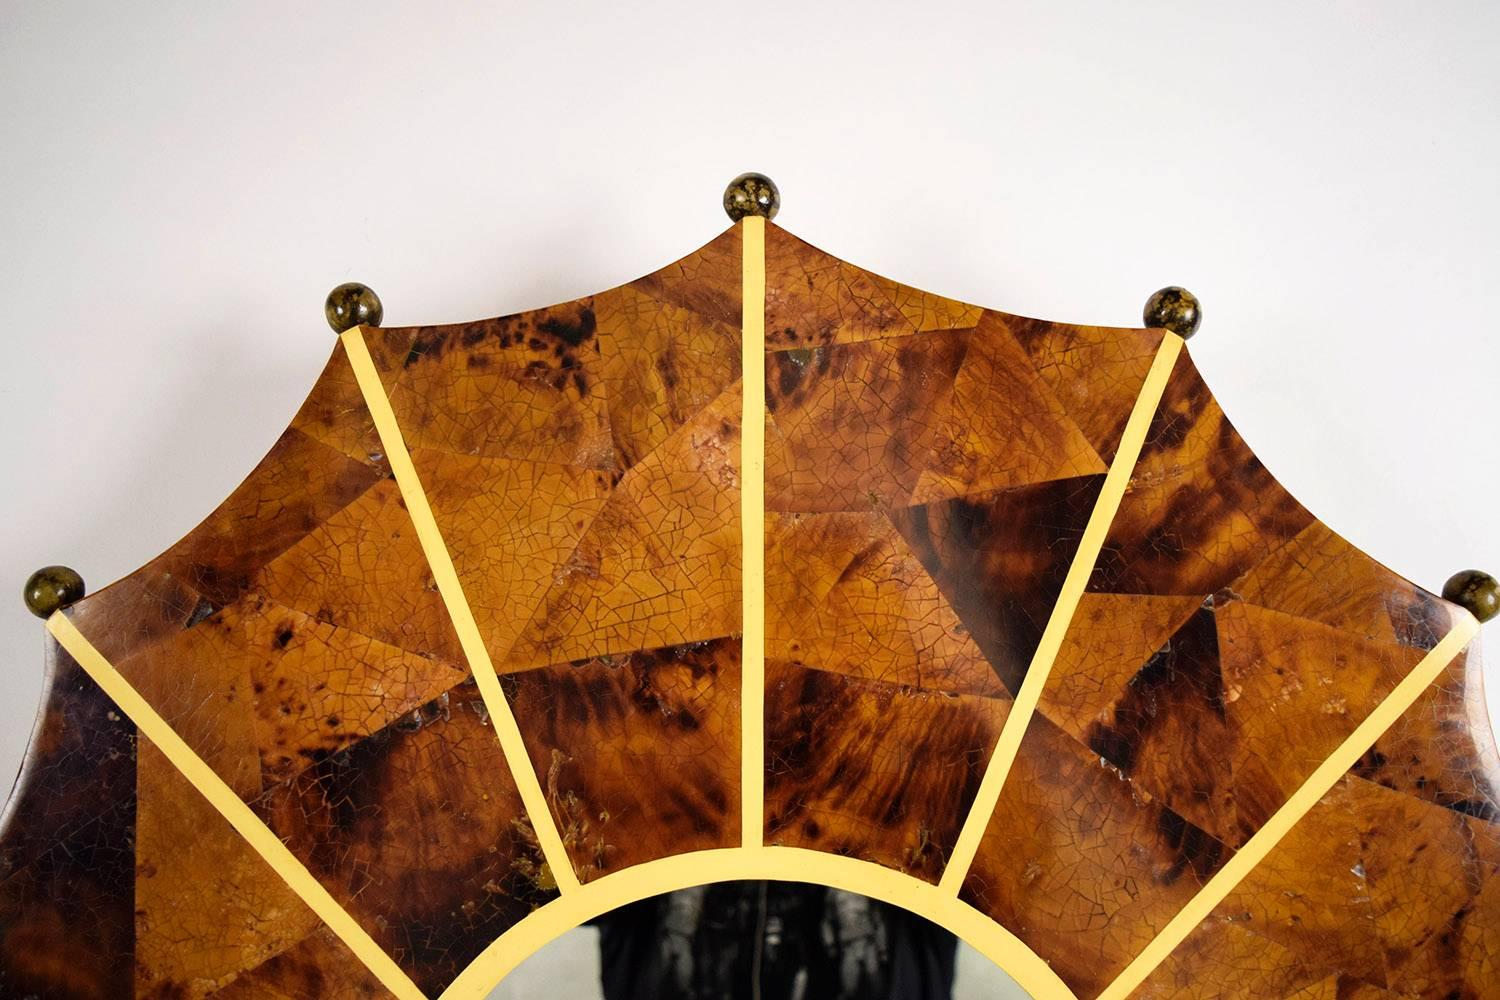 This unique 1970's starburst wall mirror features a solid wood frame that is covered in faux tortoise shell veneers. The tortoise shell veneers are separated by a thin yellow divider that is accented with round wood balls. The piece is accompanied